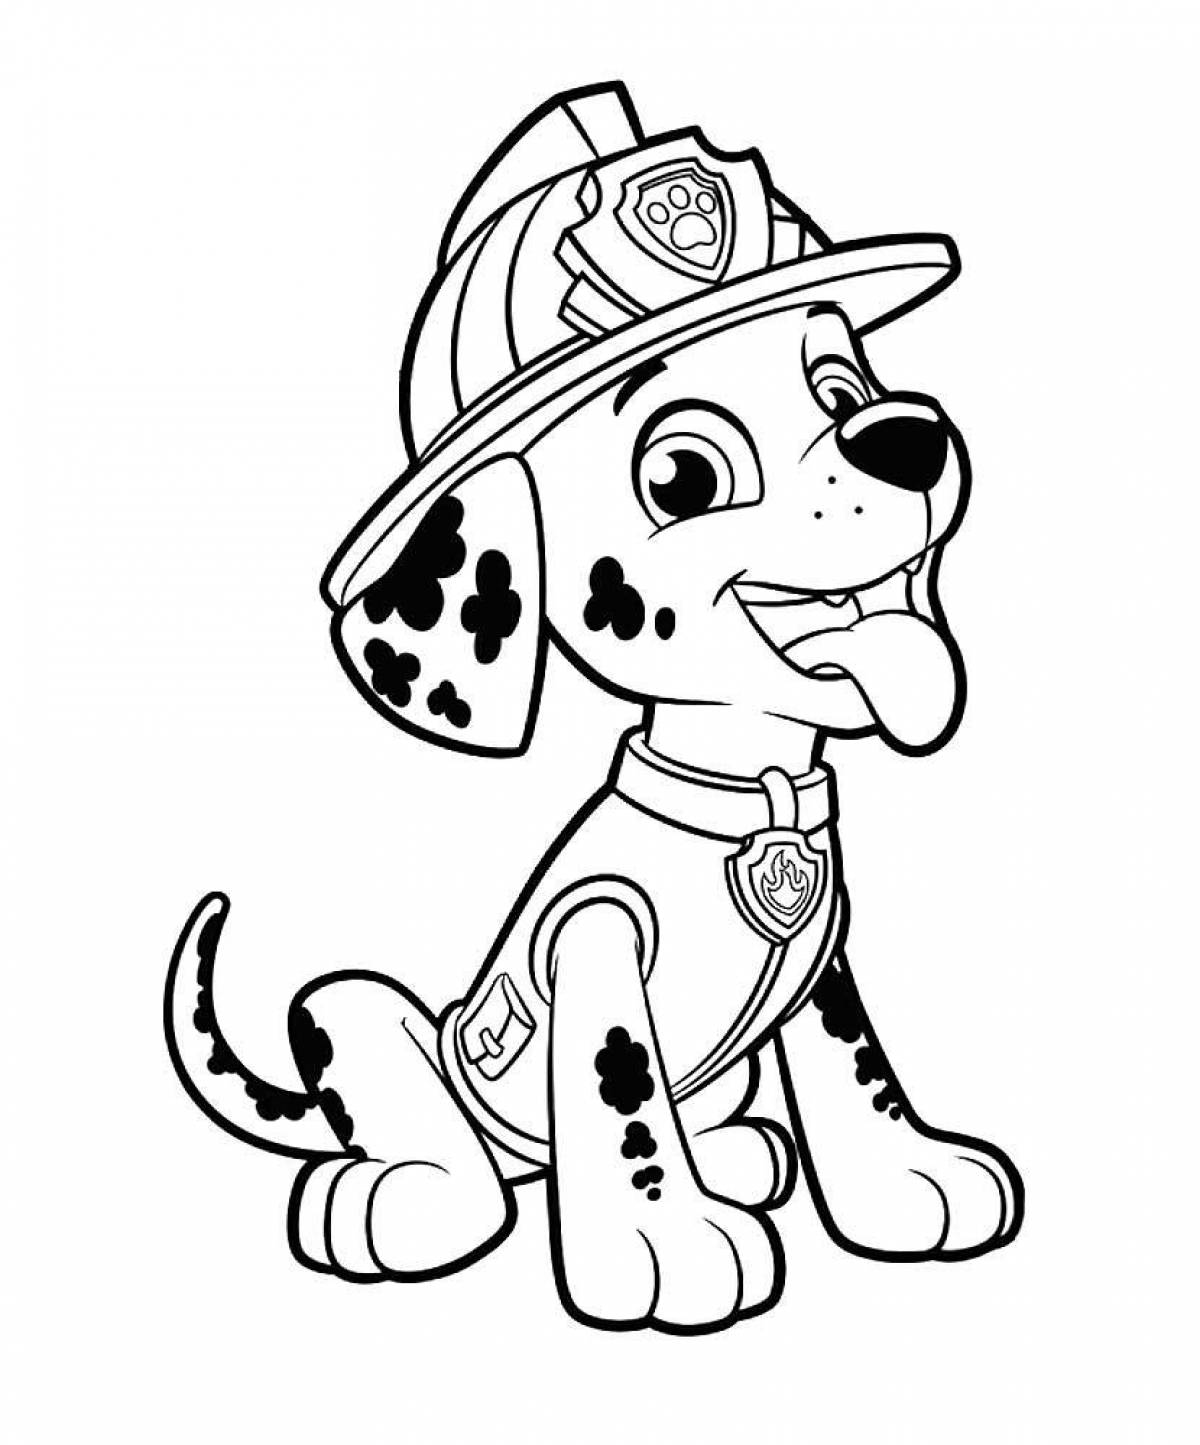 Marshal coloring page ready